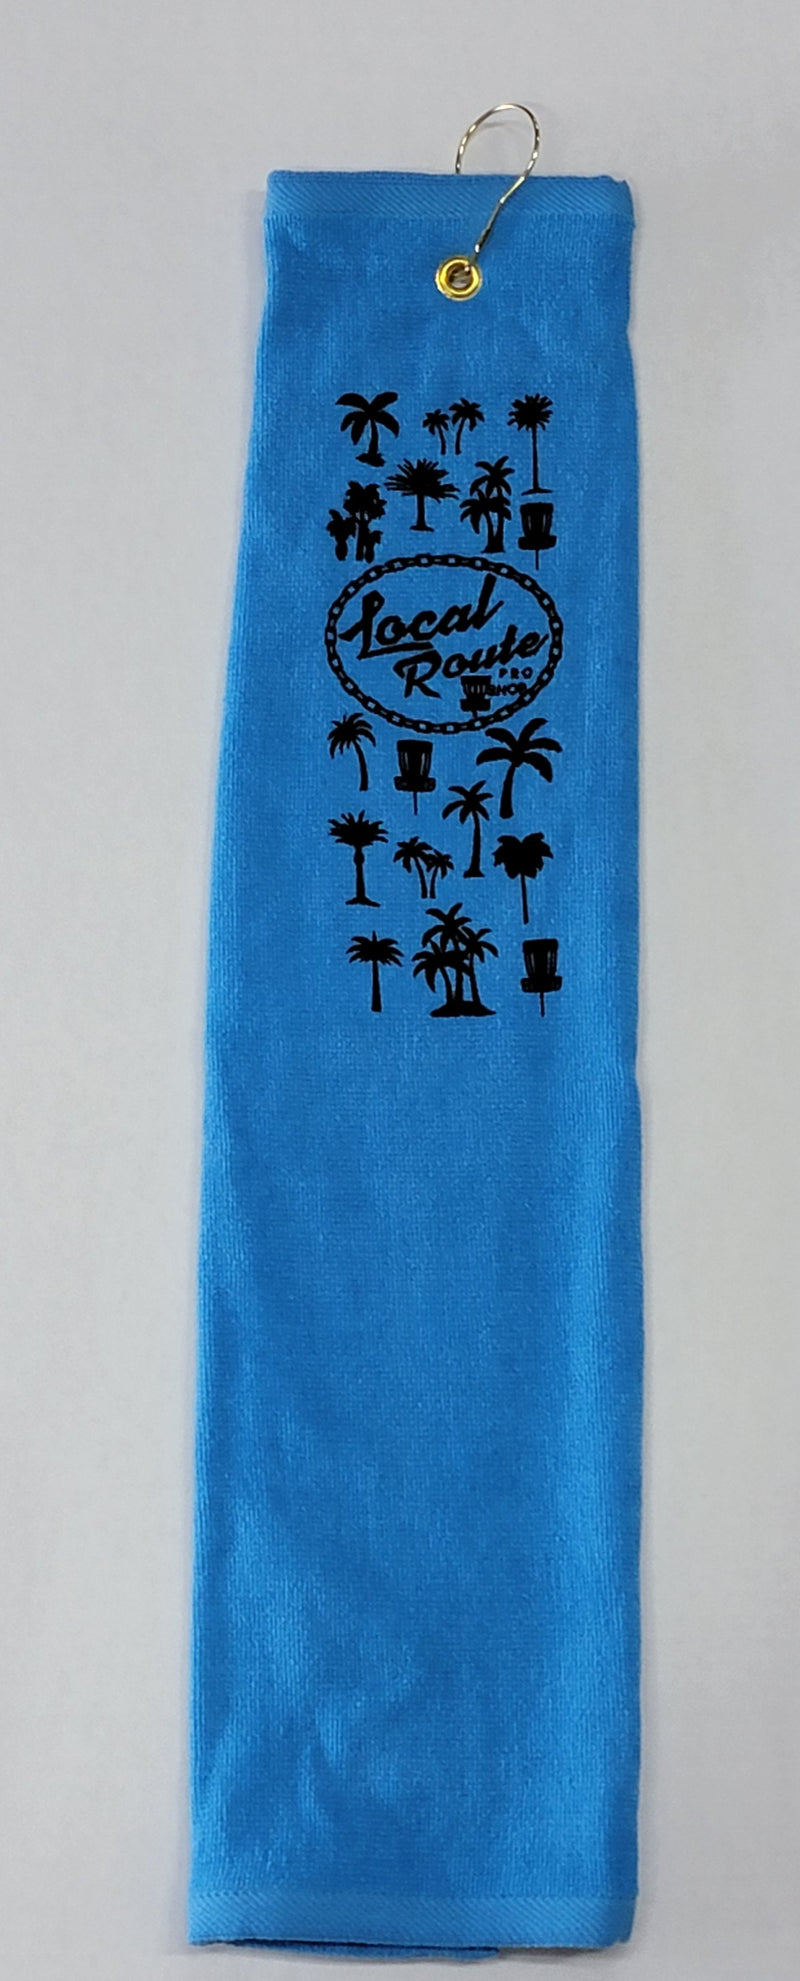 Local Route Tri-Fold Towel - Trees A Crowd